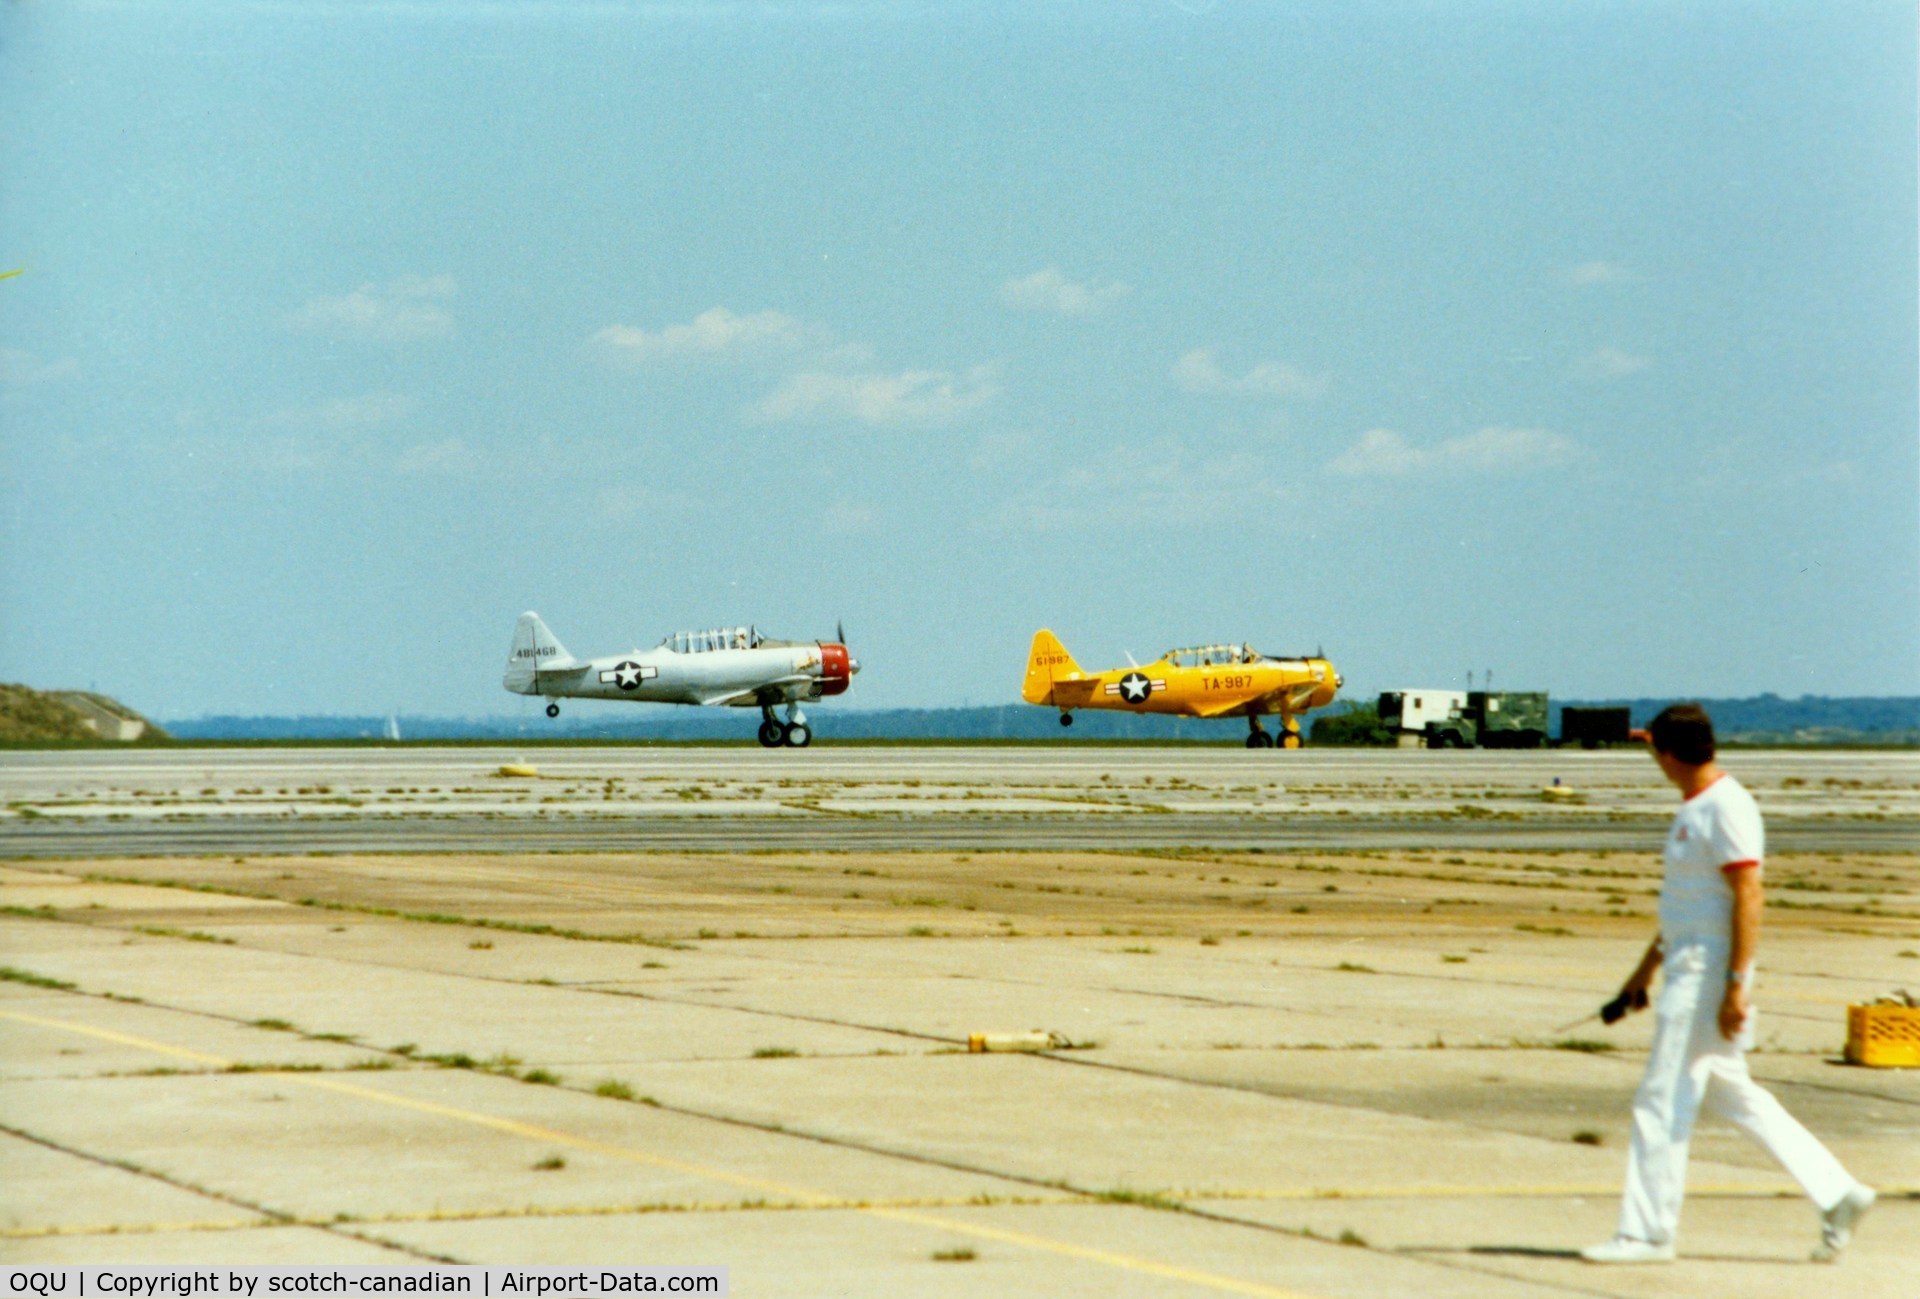 Quonset State Airport (OQU) - North America AT-6 Texan N6984C and North American AT-6 Texan 51-14987 at Quonset State Airport, North Kingstown, RI - circa 1980's